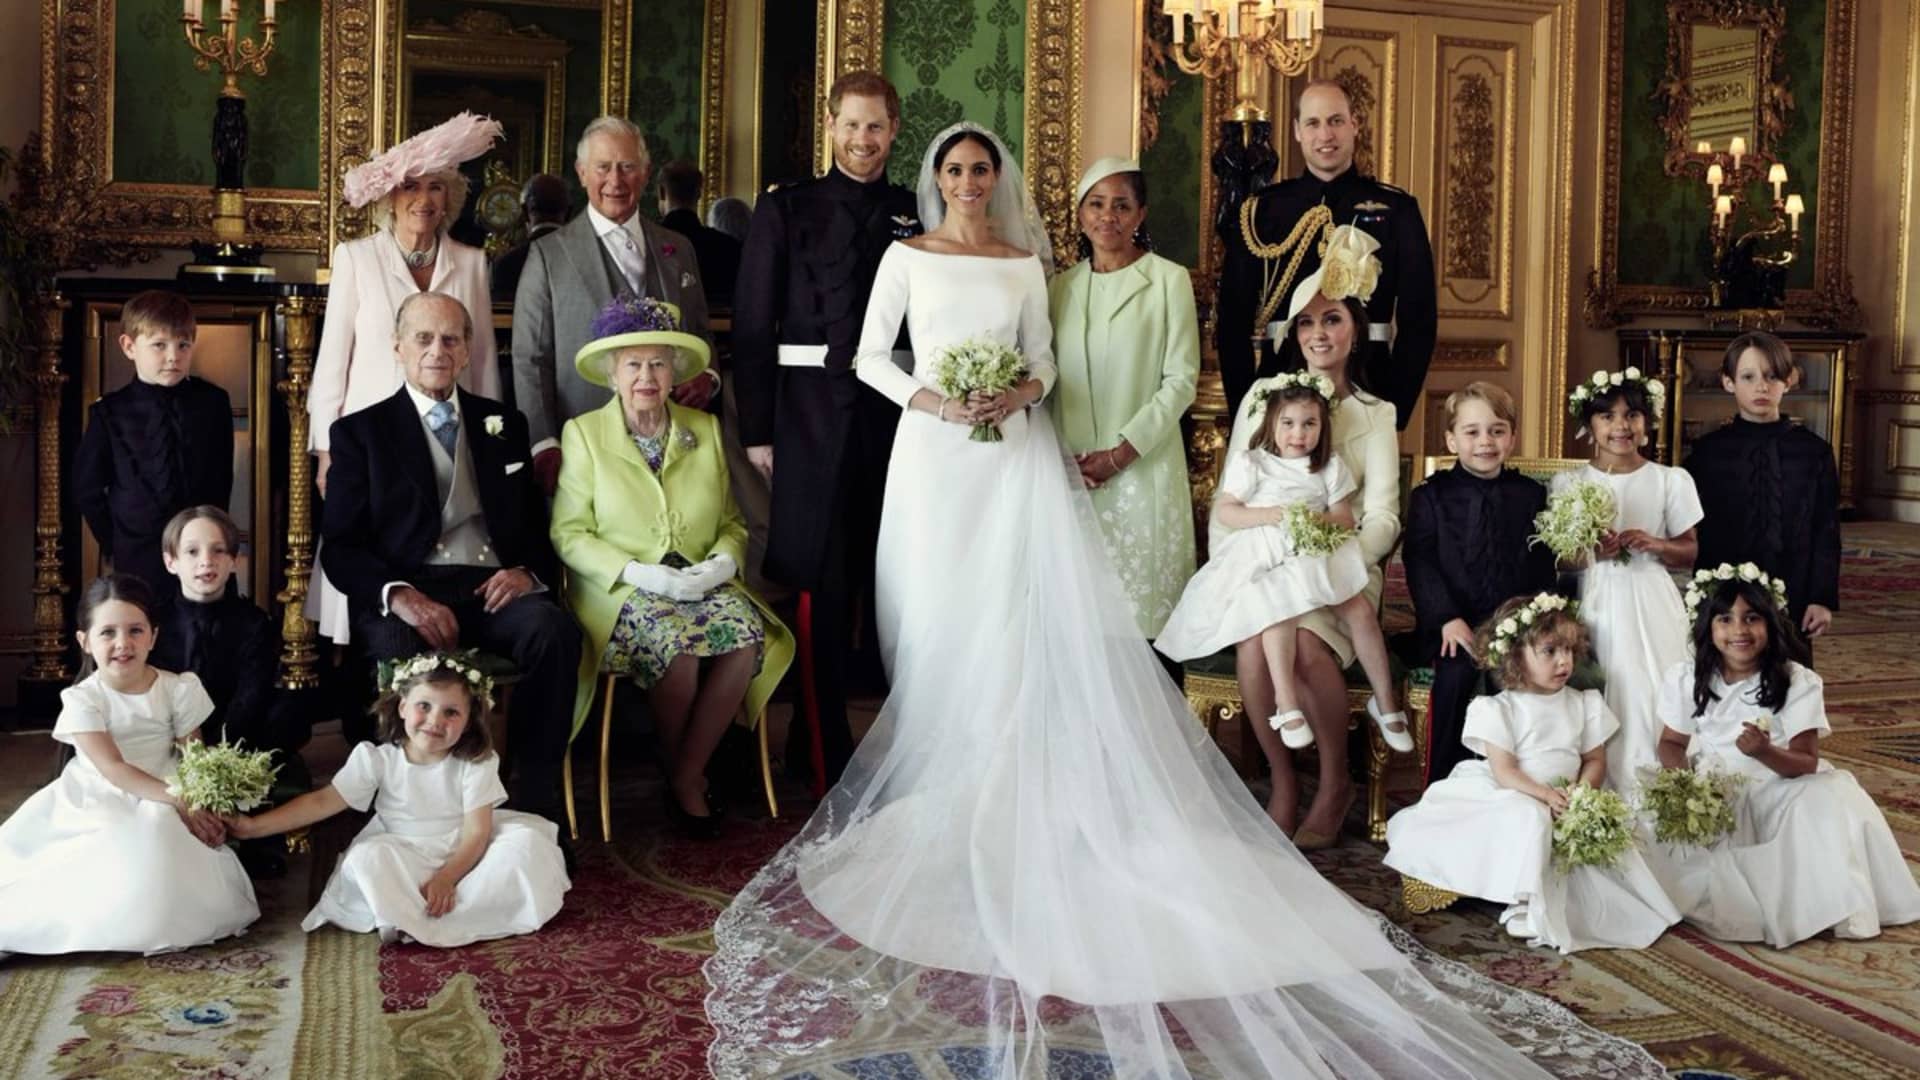 The official wedding family photo of the royal family from the wedding of Prince Harry and Duchess of Sussex, Meghan Markle.